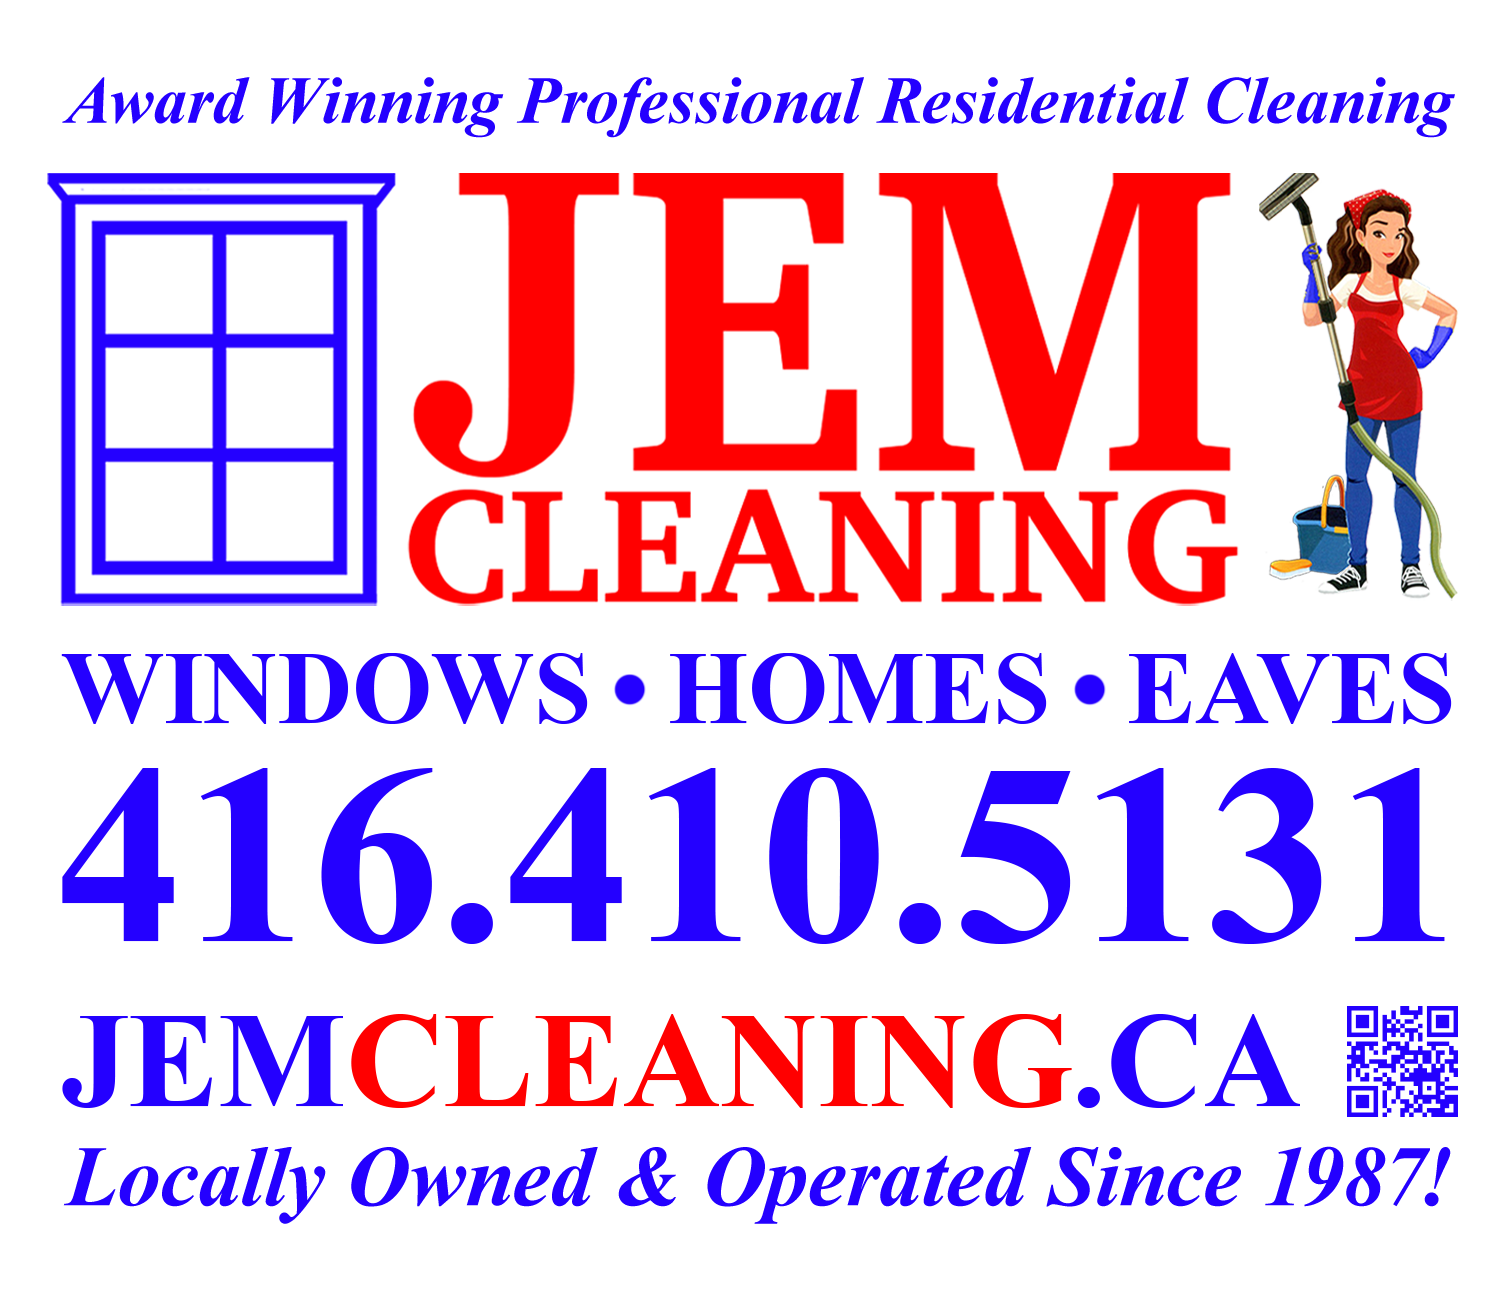 JEM CLEANING